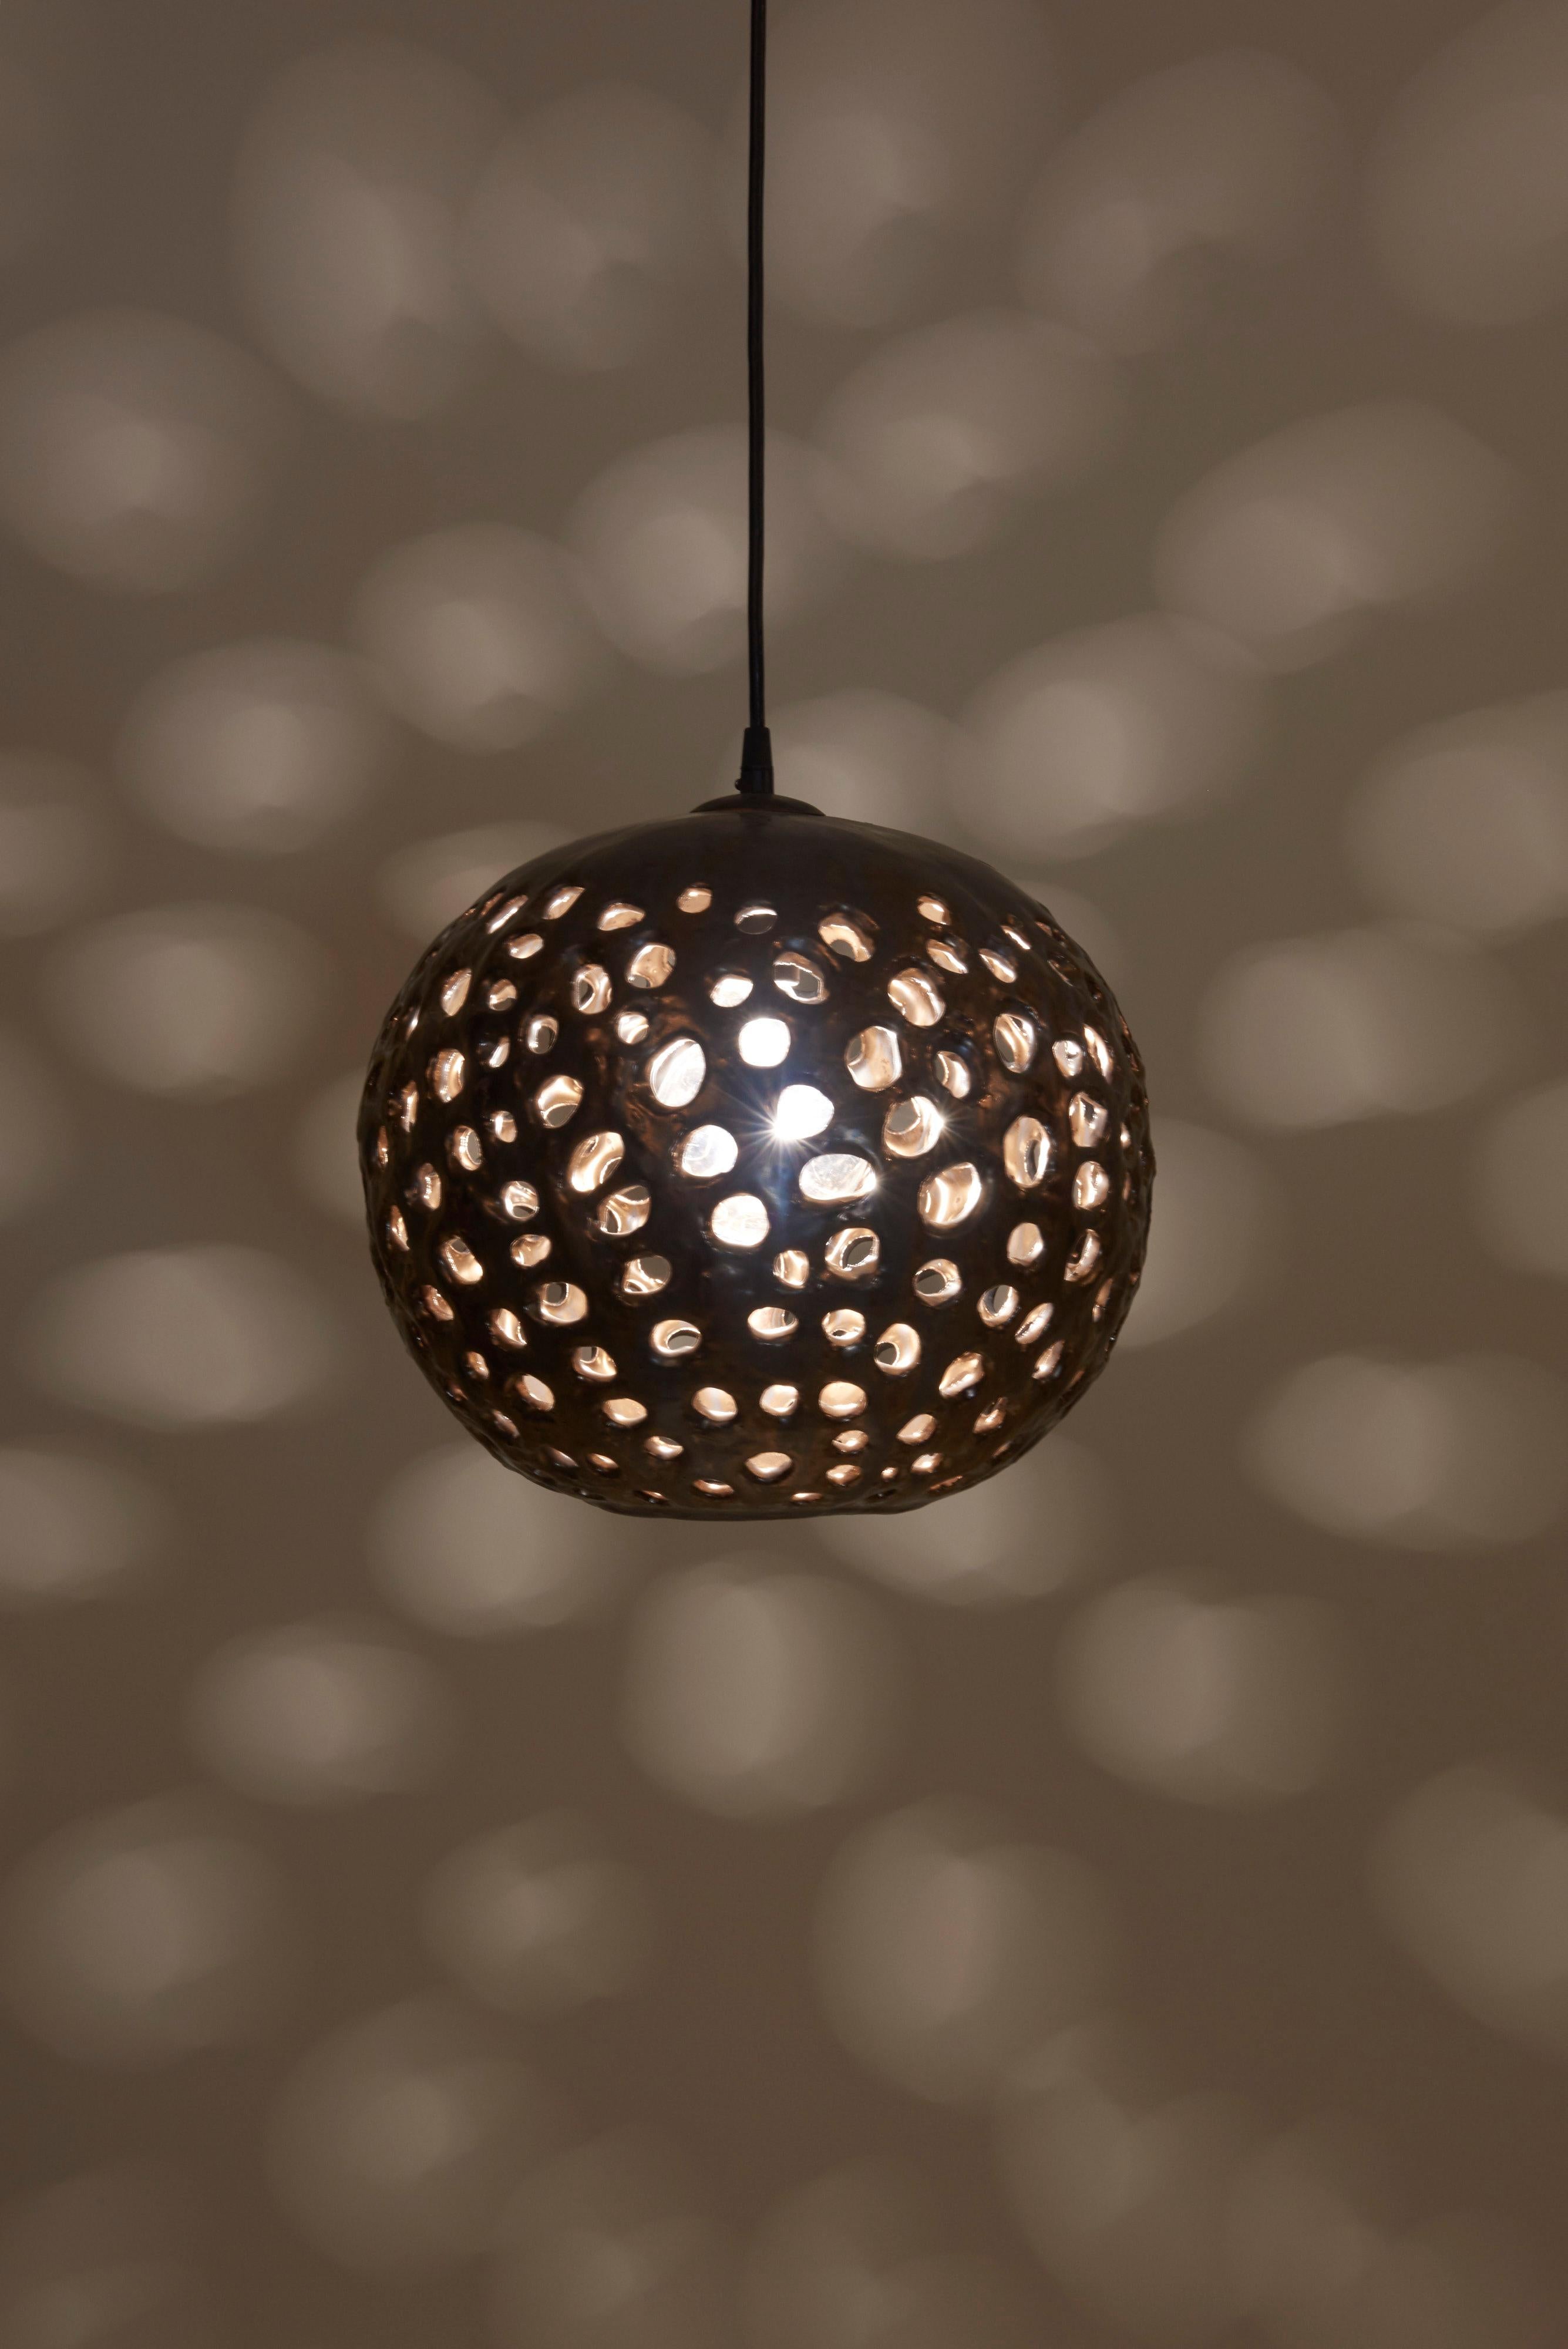 Stan Bitters Ball Lamp in Spray Metal, USA, 2017 In Excellent Condition For Sale In Berlin, DE